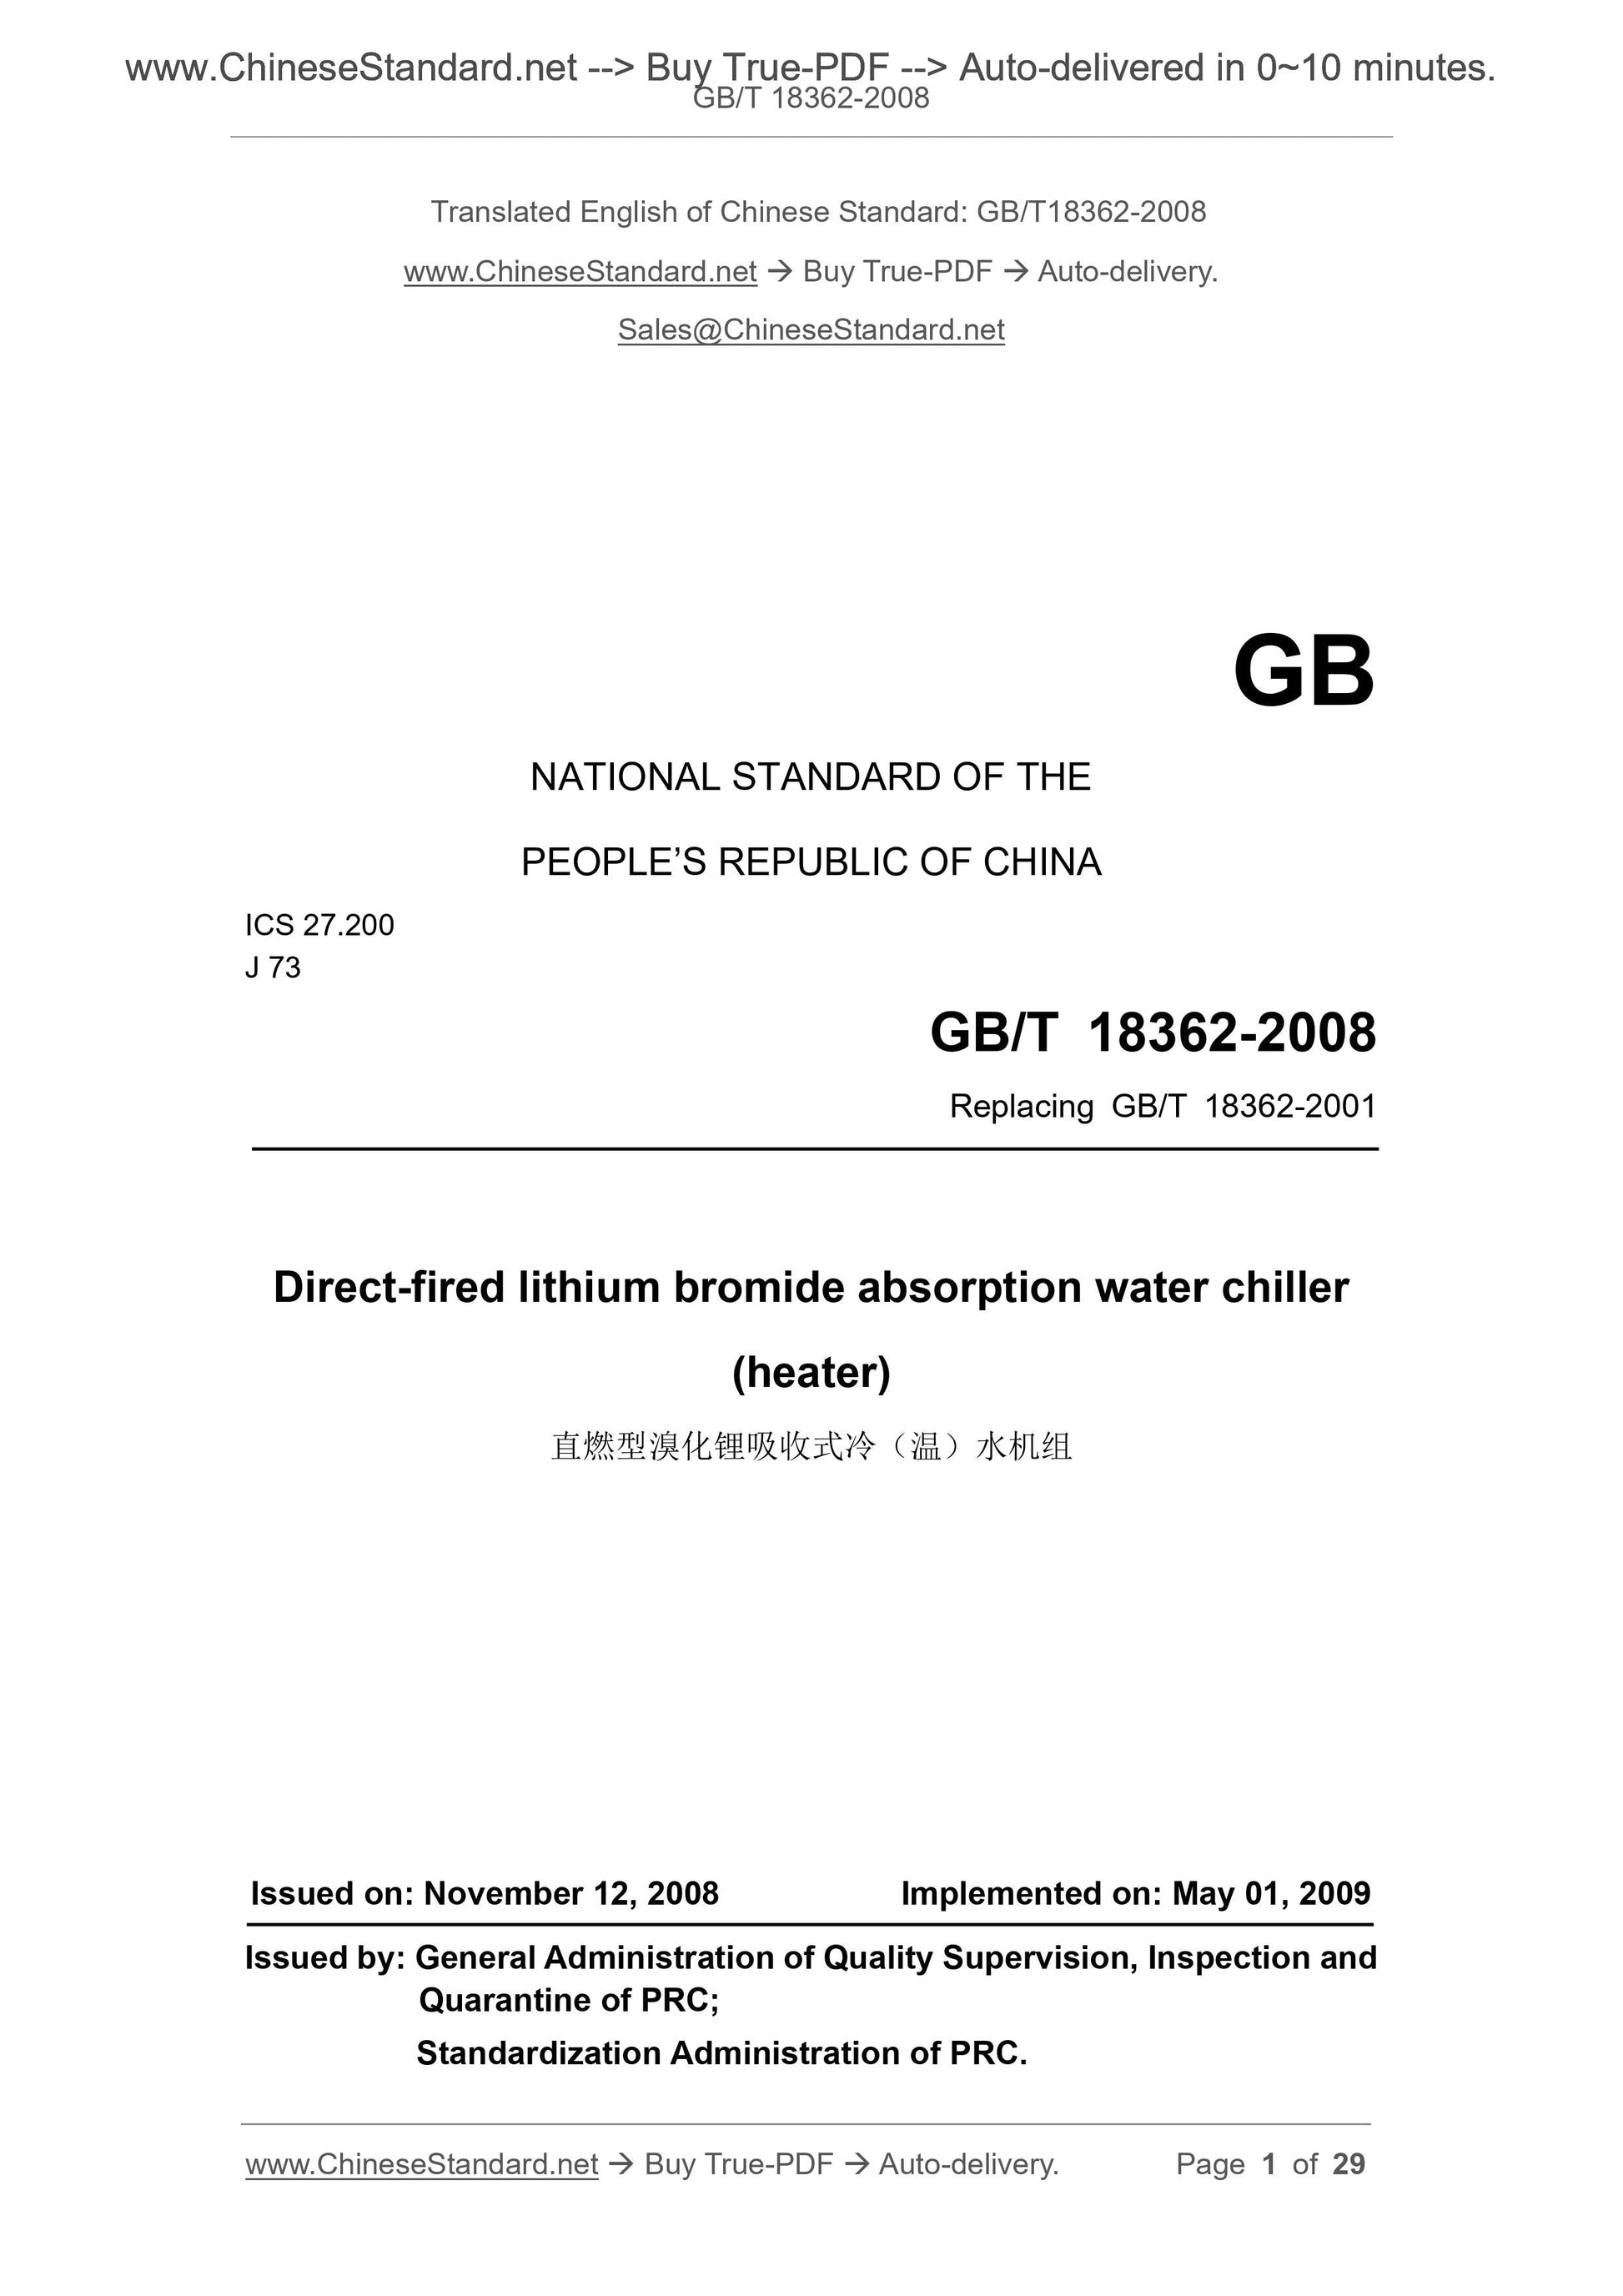 GB/T 18362-2008 Page 1